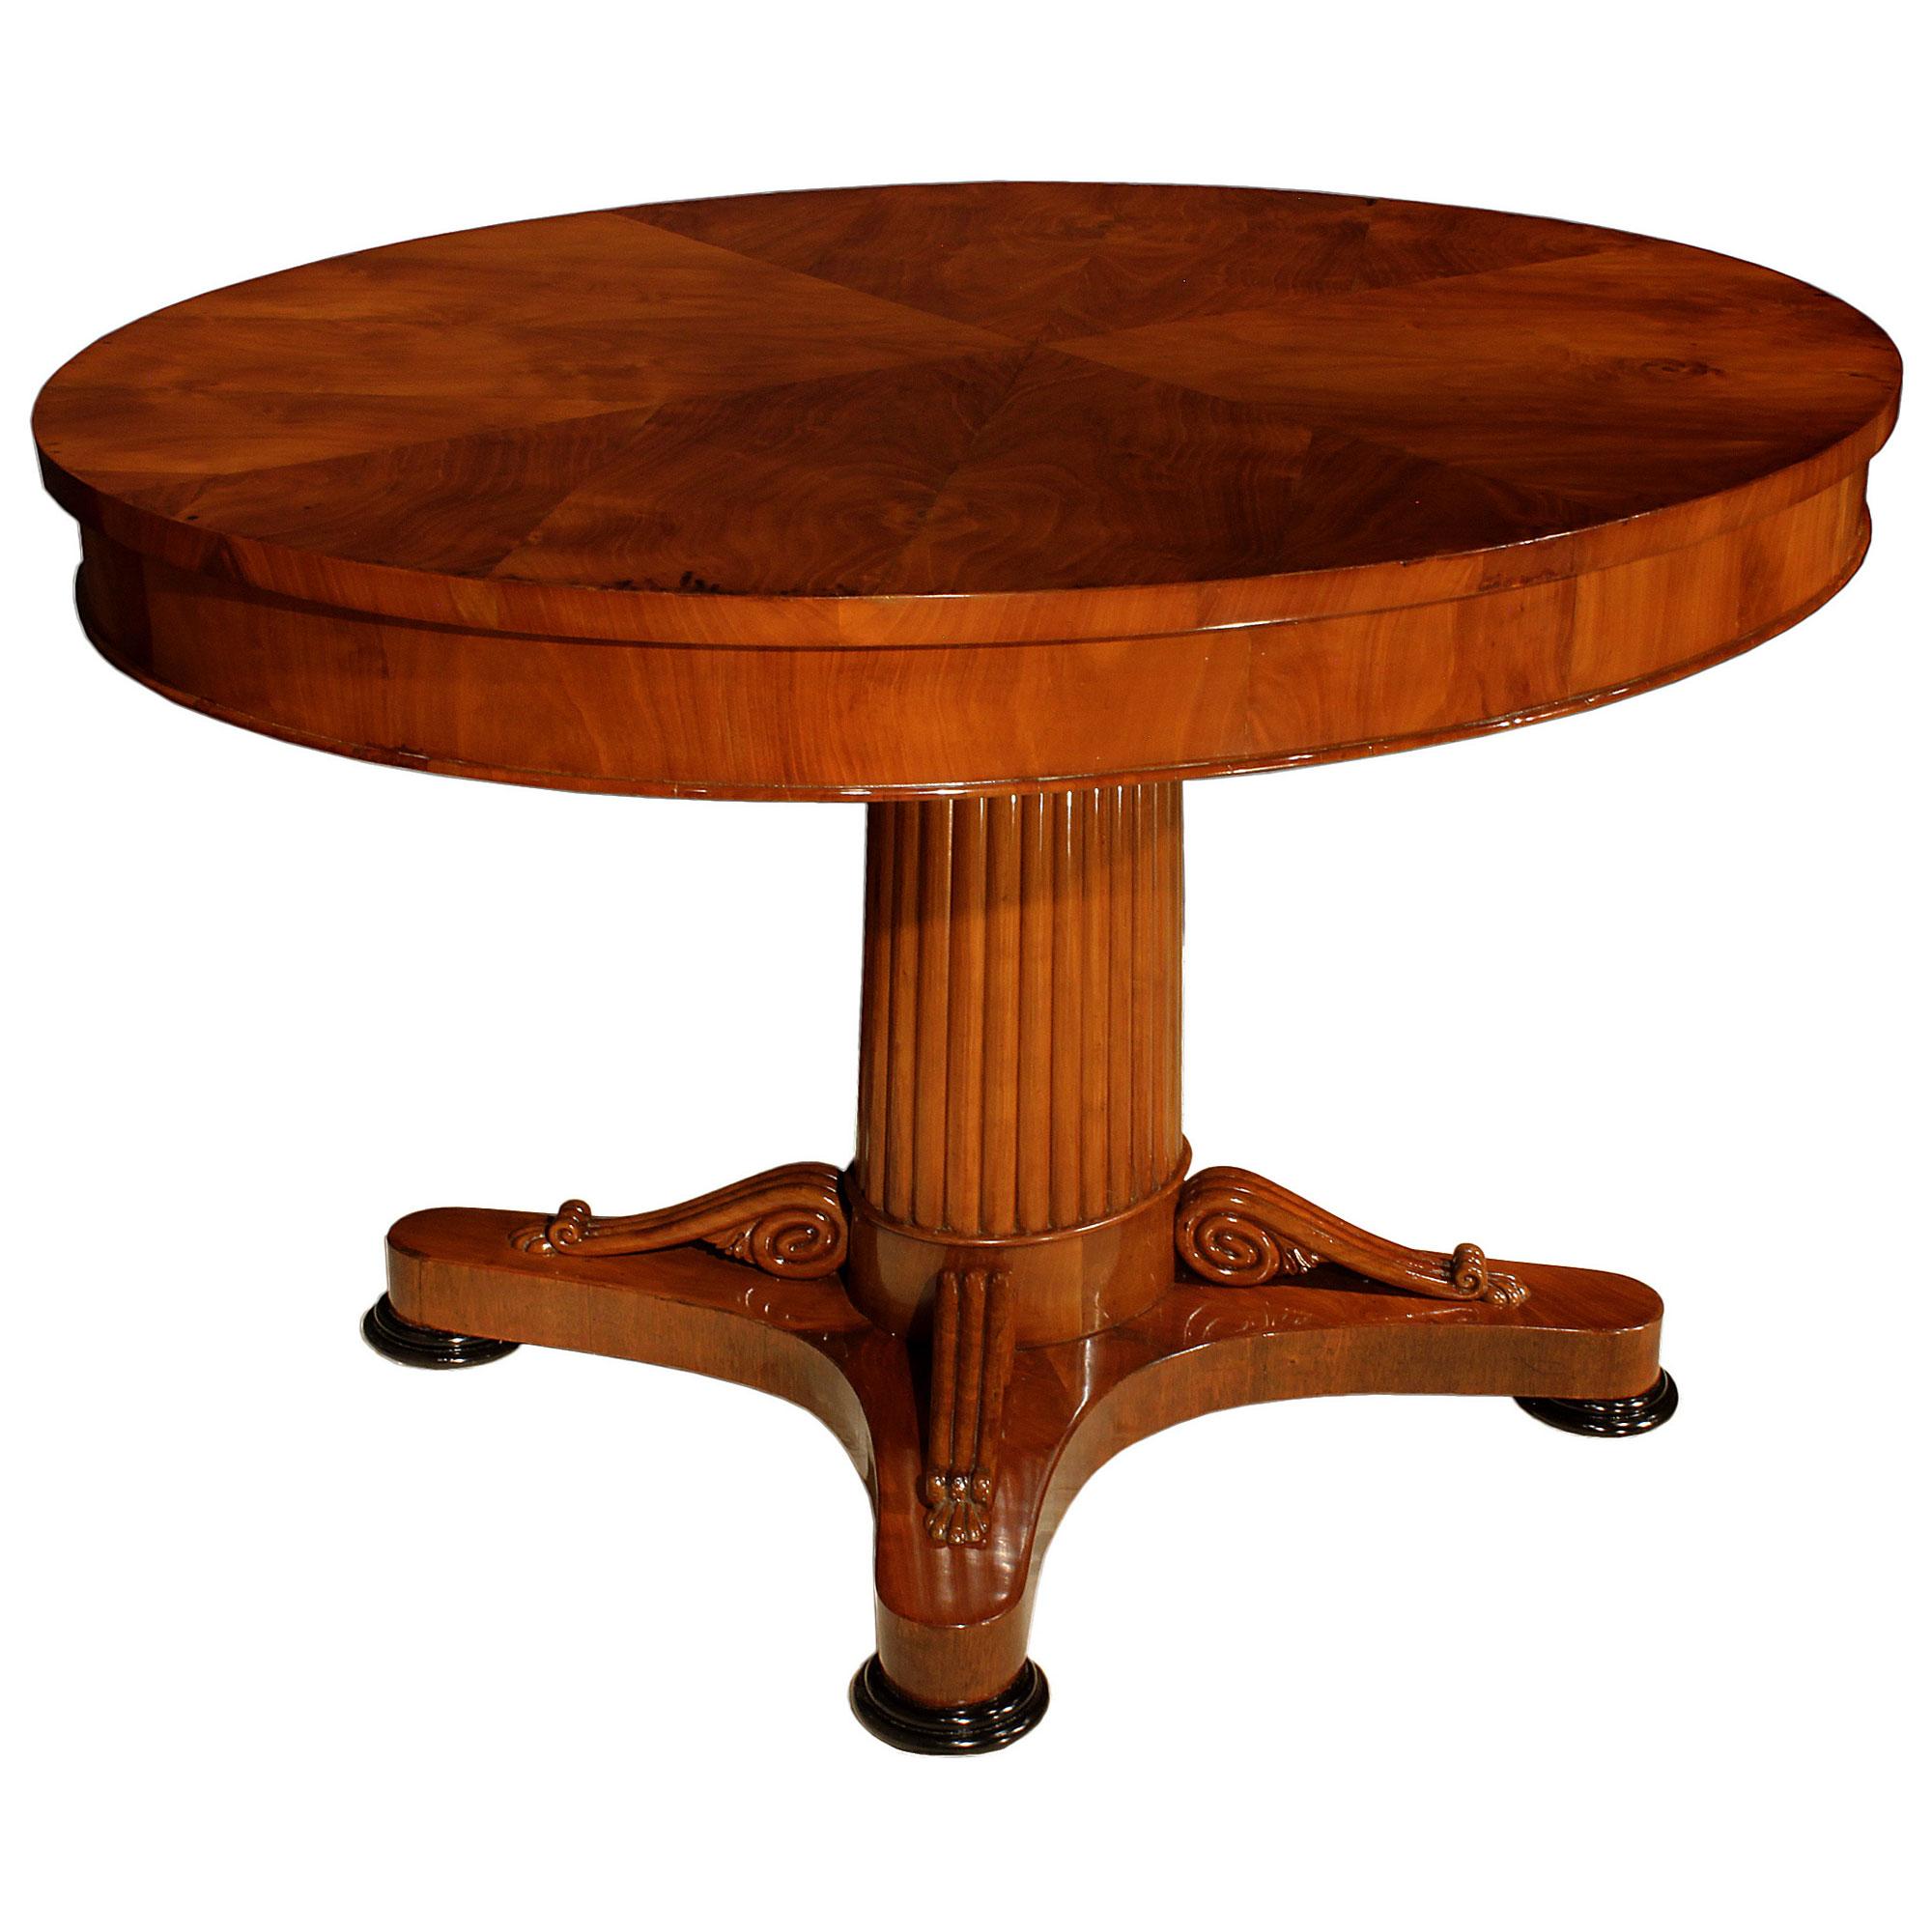 A striking Continental early 19th century mahogany center table. The table is raised on ebonized fruitwood feet below the concave sided stretcher decorated with scrolled elements topped with acanthus leaves. Above is the elegant reeded central